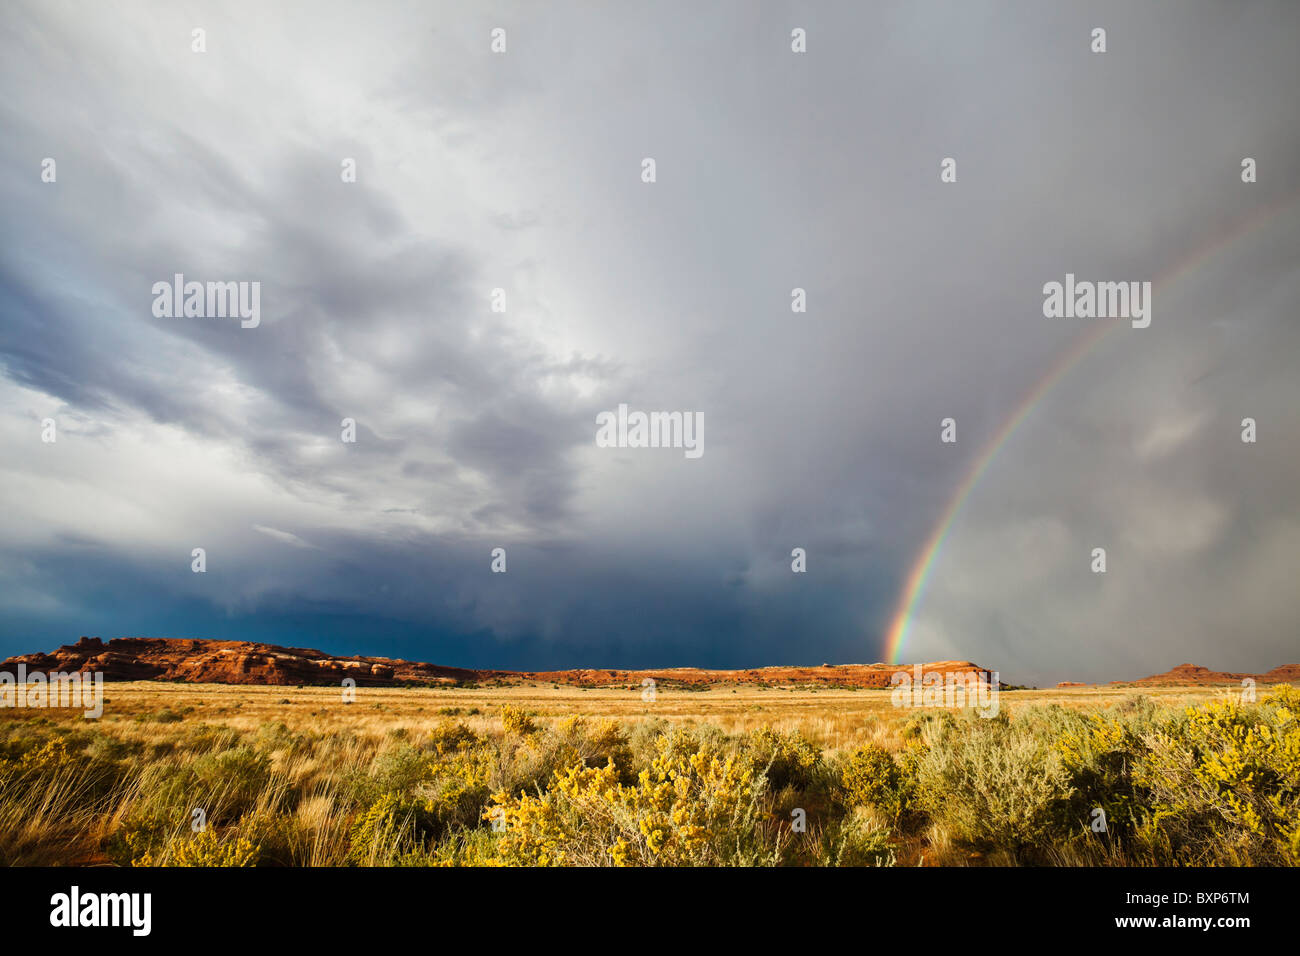 A rainbow and storm clouds over the desert of Southeast Utah, near Canyonlands National Park, USA. Stock Photo